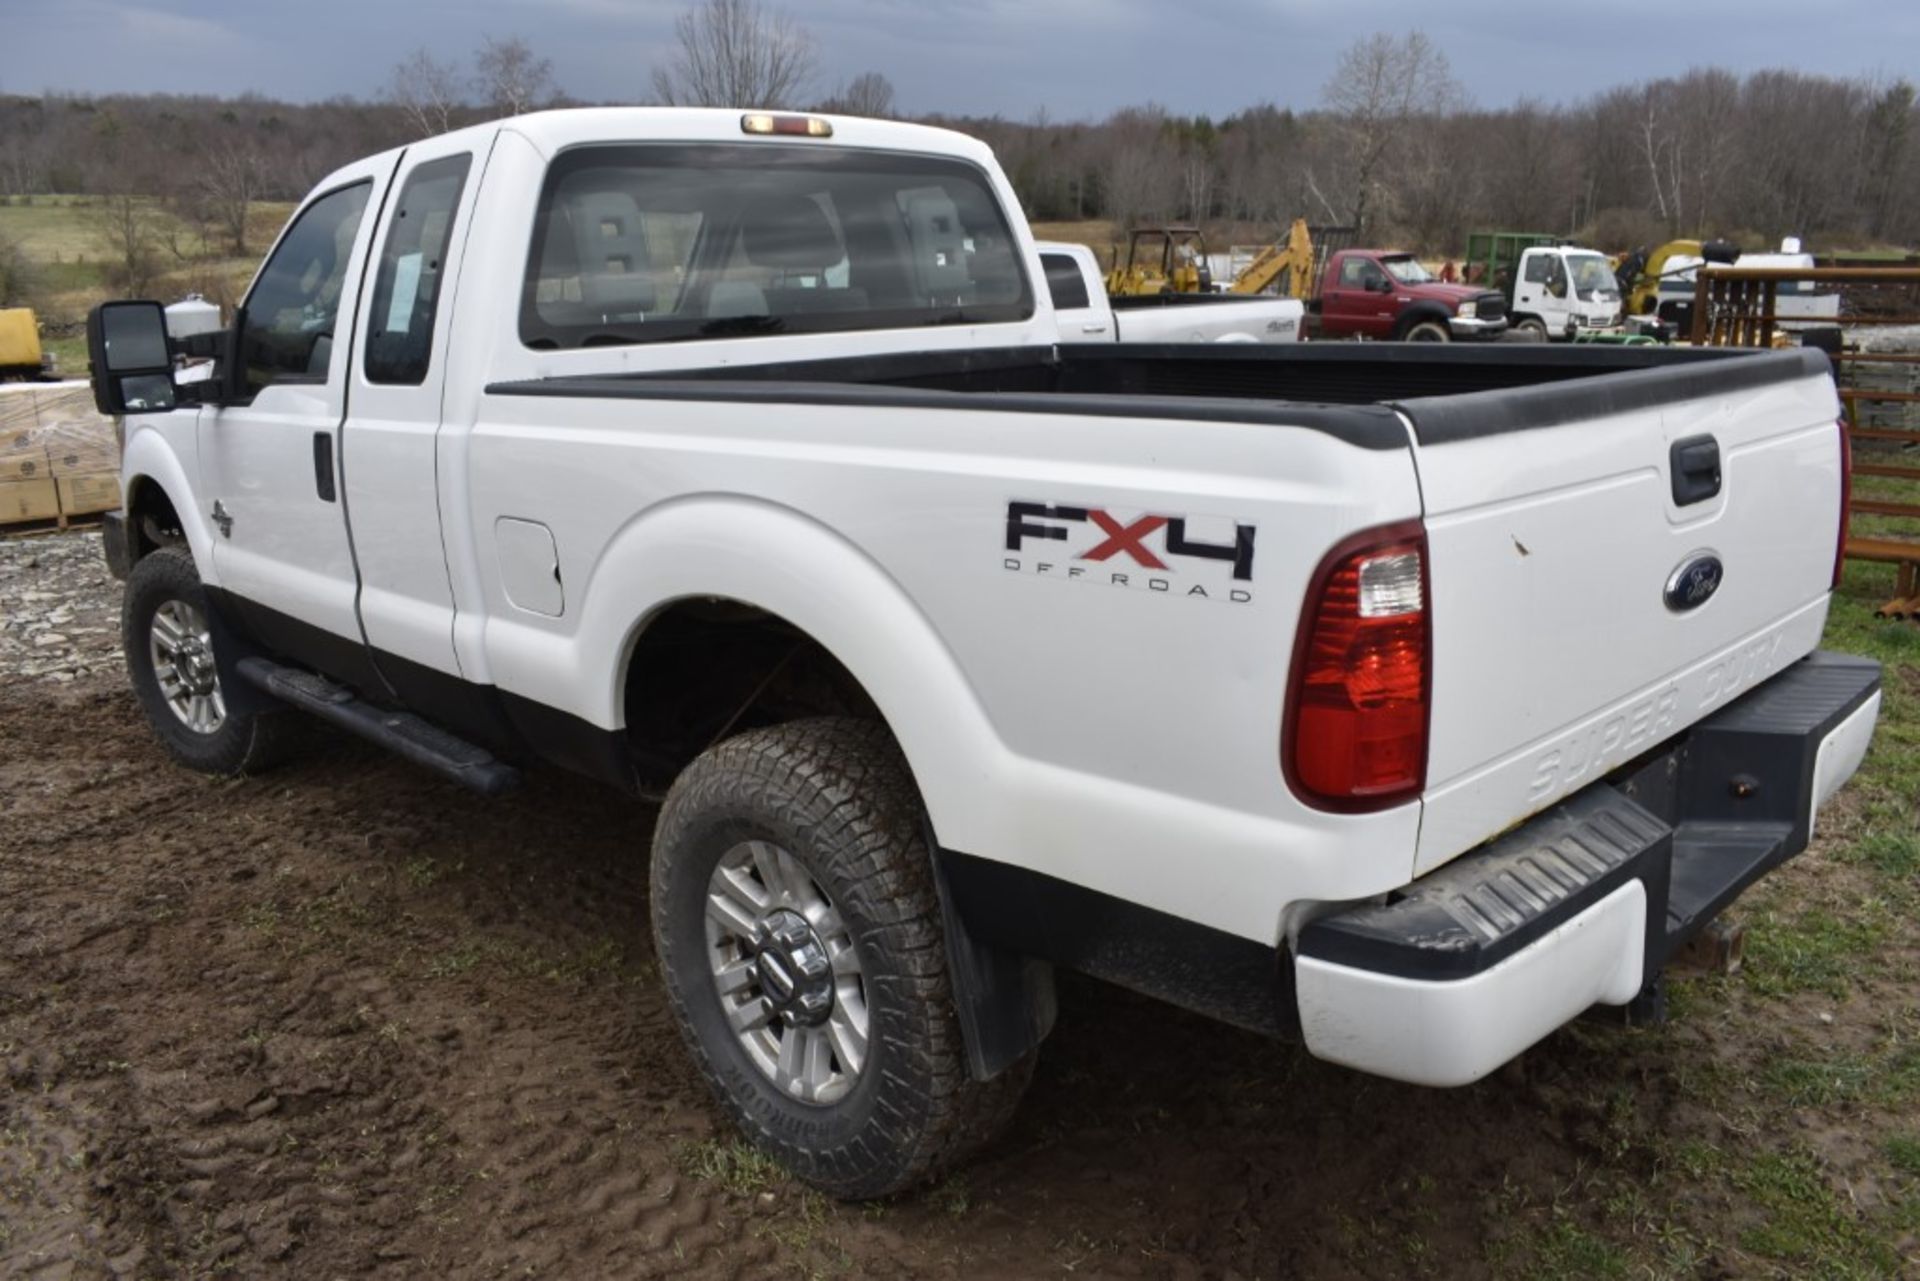 2011 Ford F-250 Super Duty Truck - Image 7 of 40